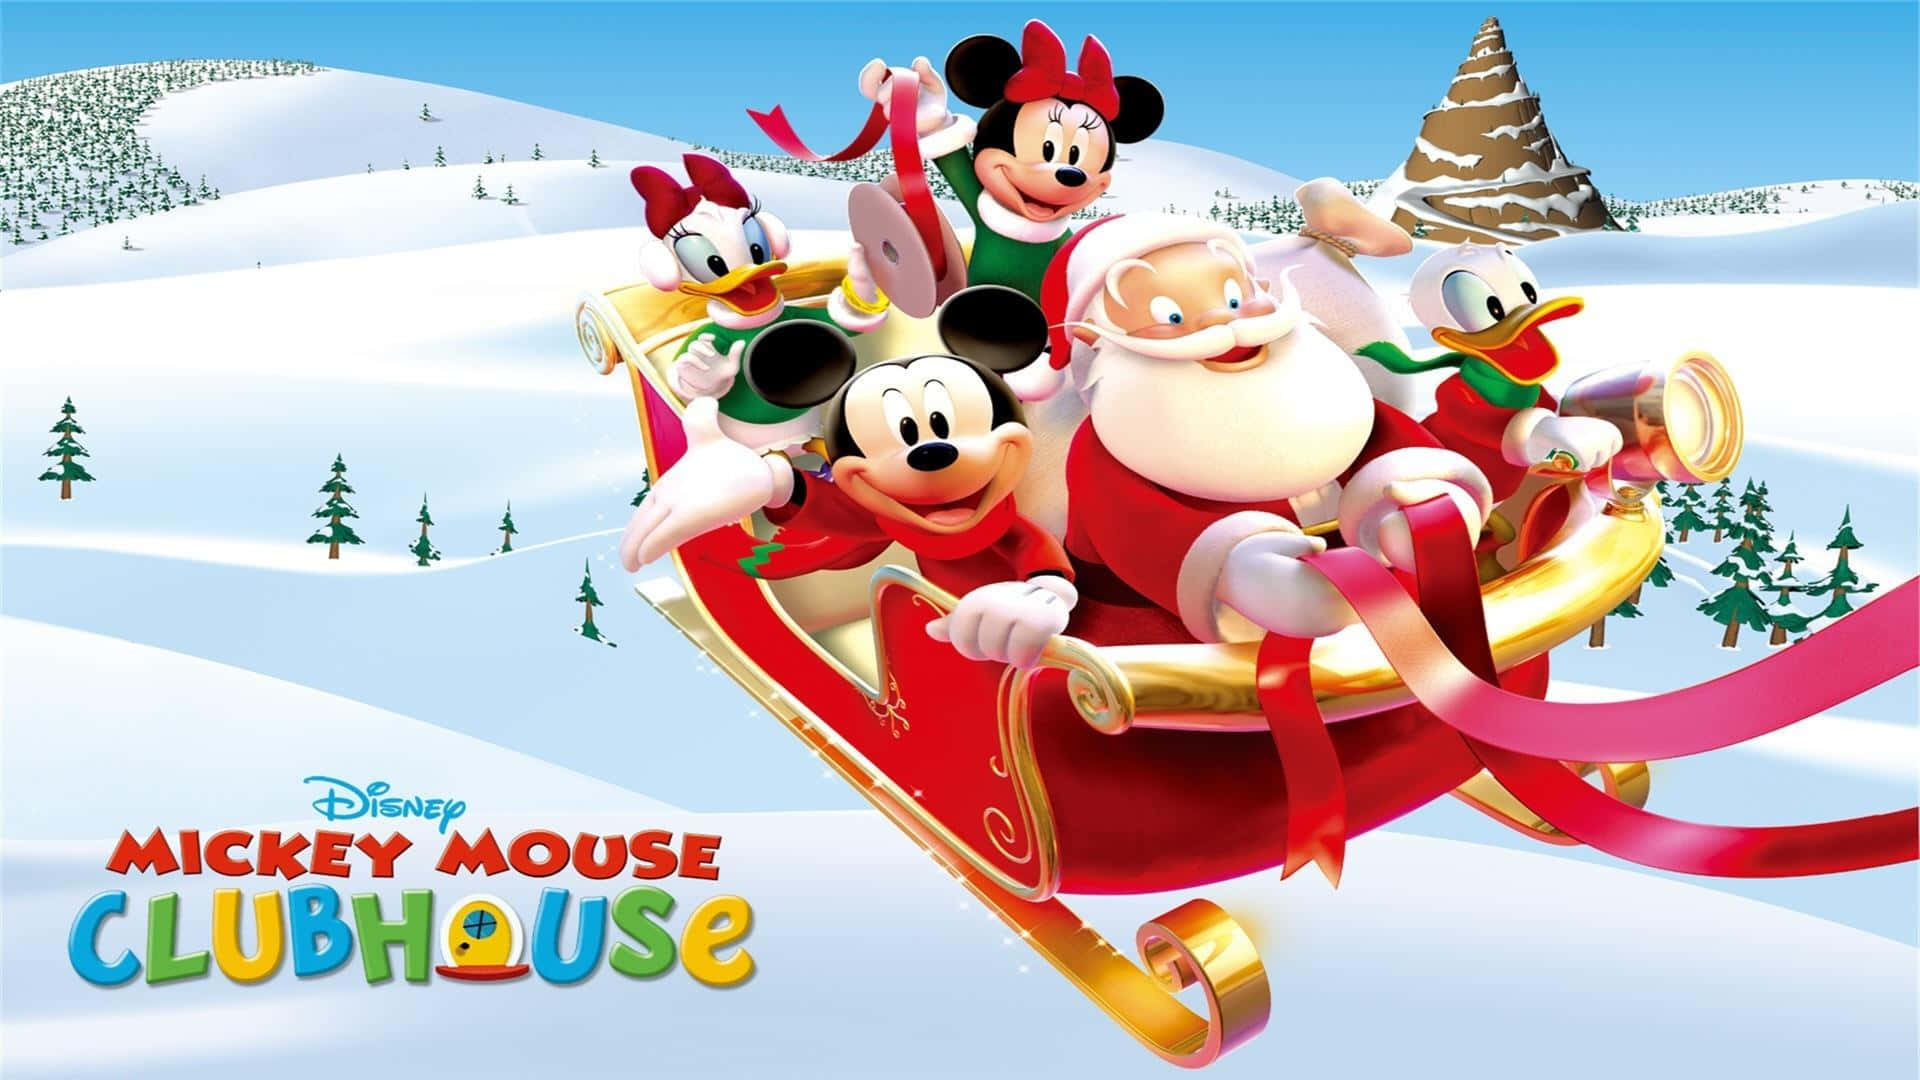 Mickeymouse Clubhouse 2 - Babbo Natale